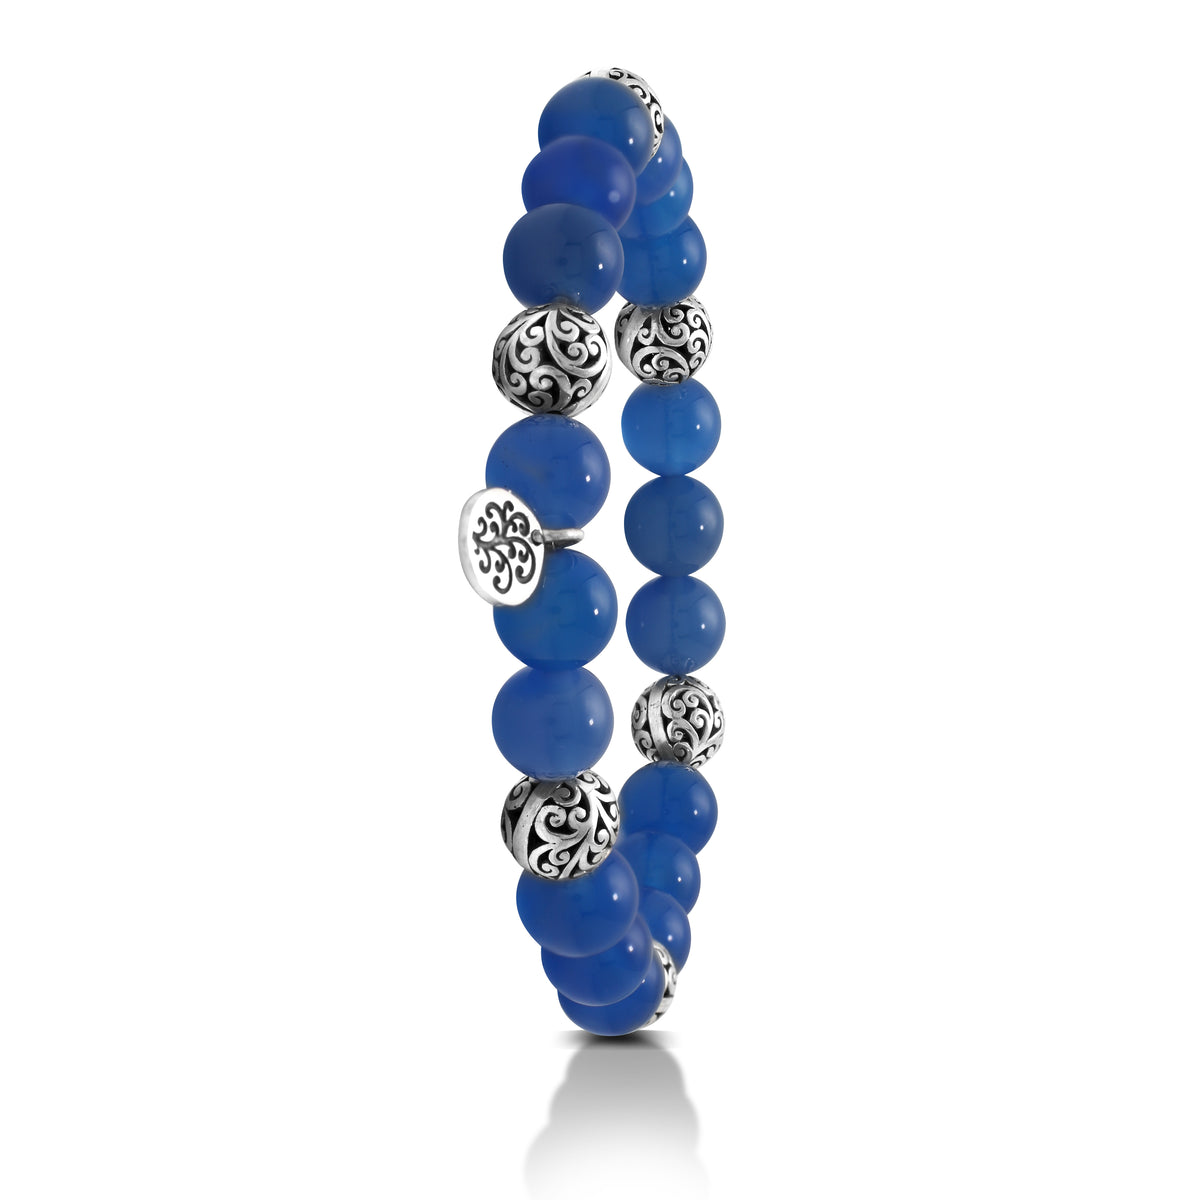 Blue Agate Bead (8mm) with Scroll Sterling Silver Bead Stretch Bracelet